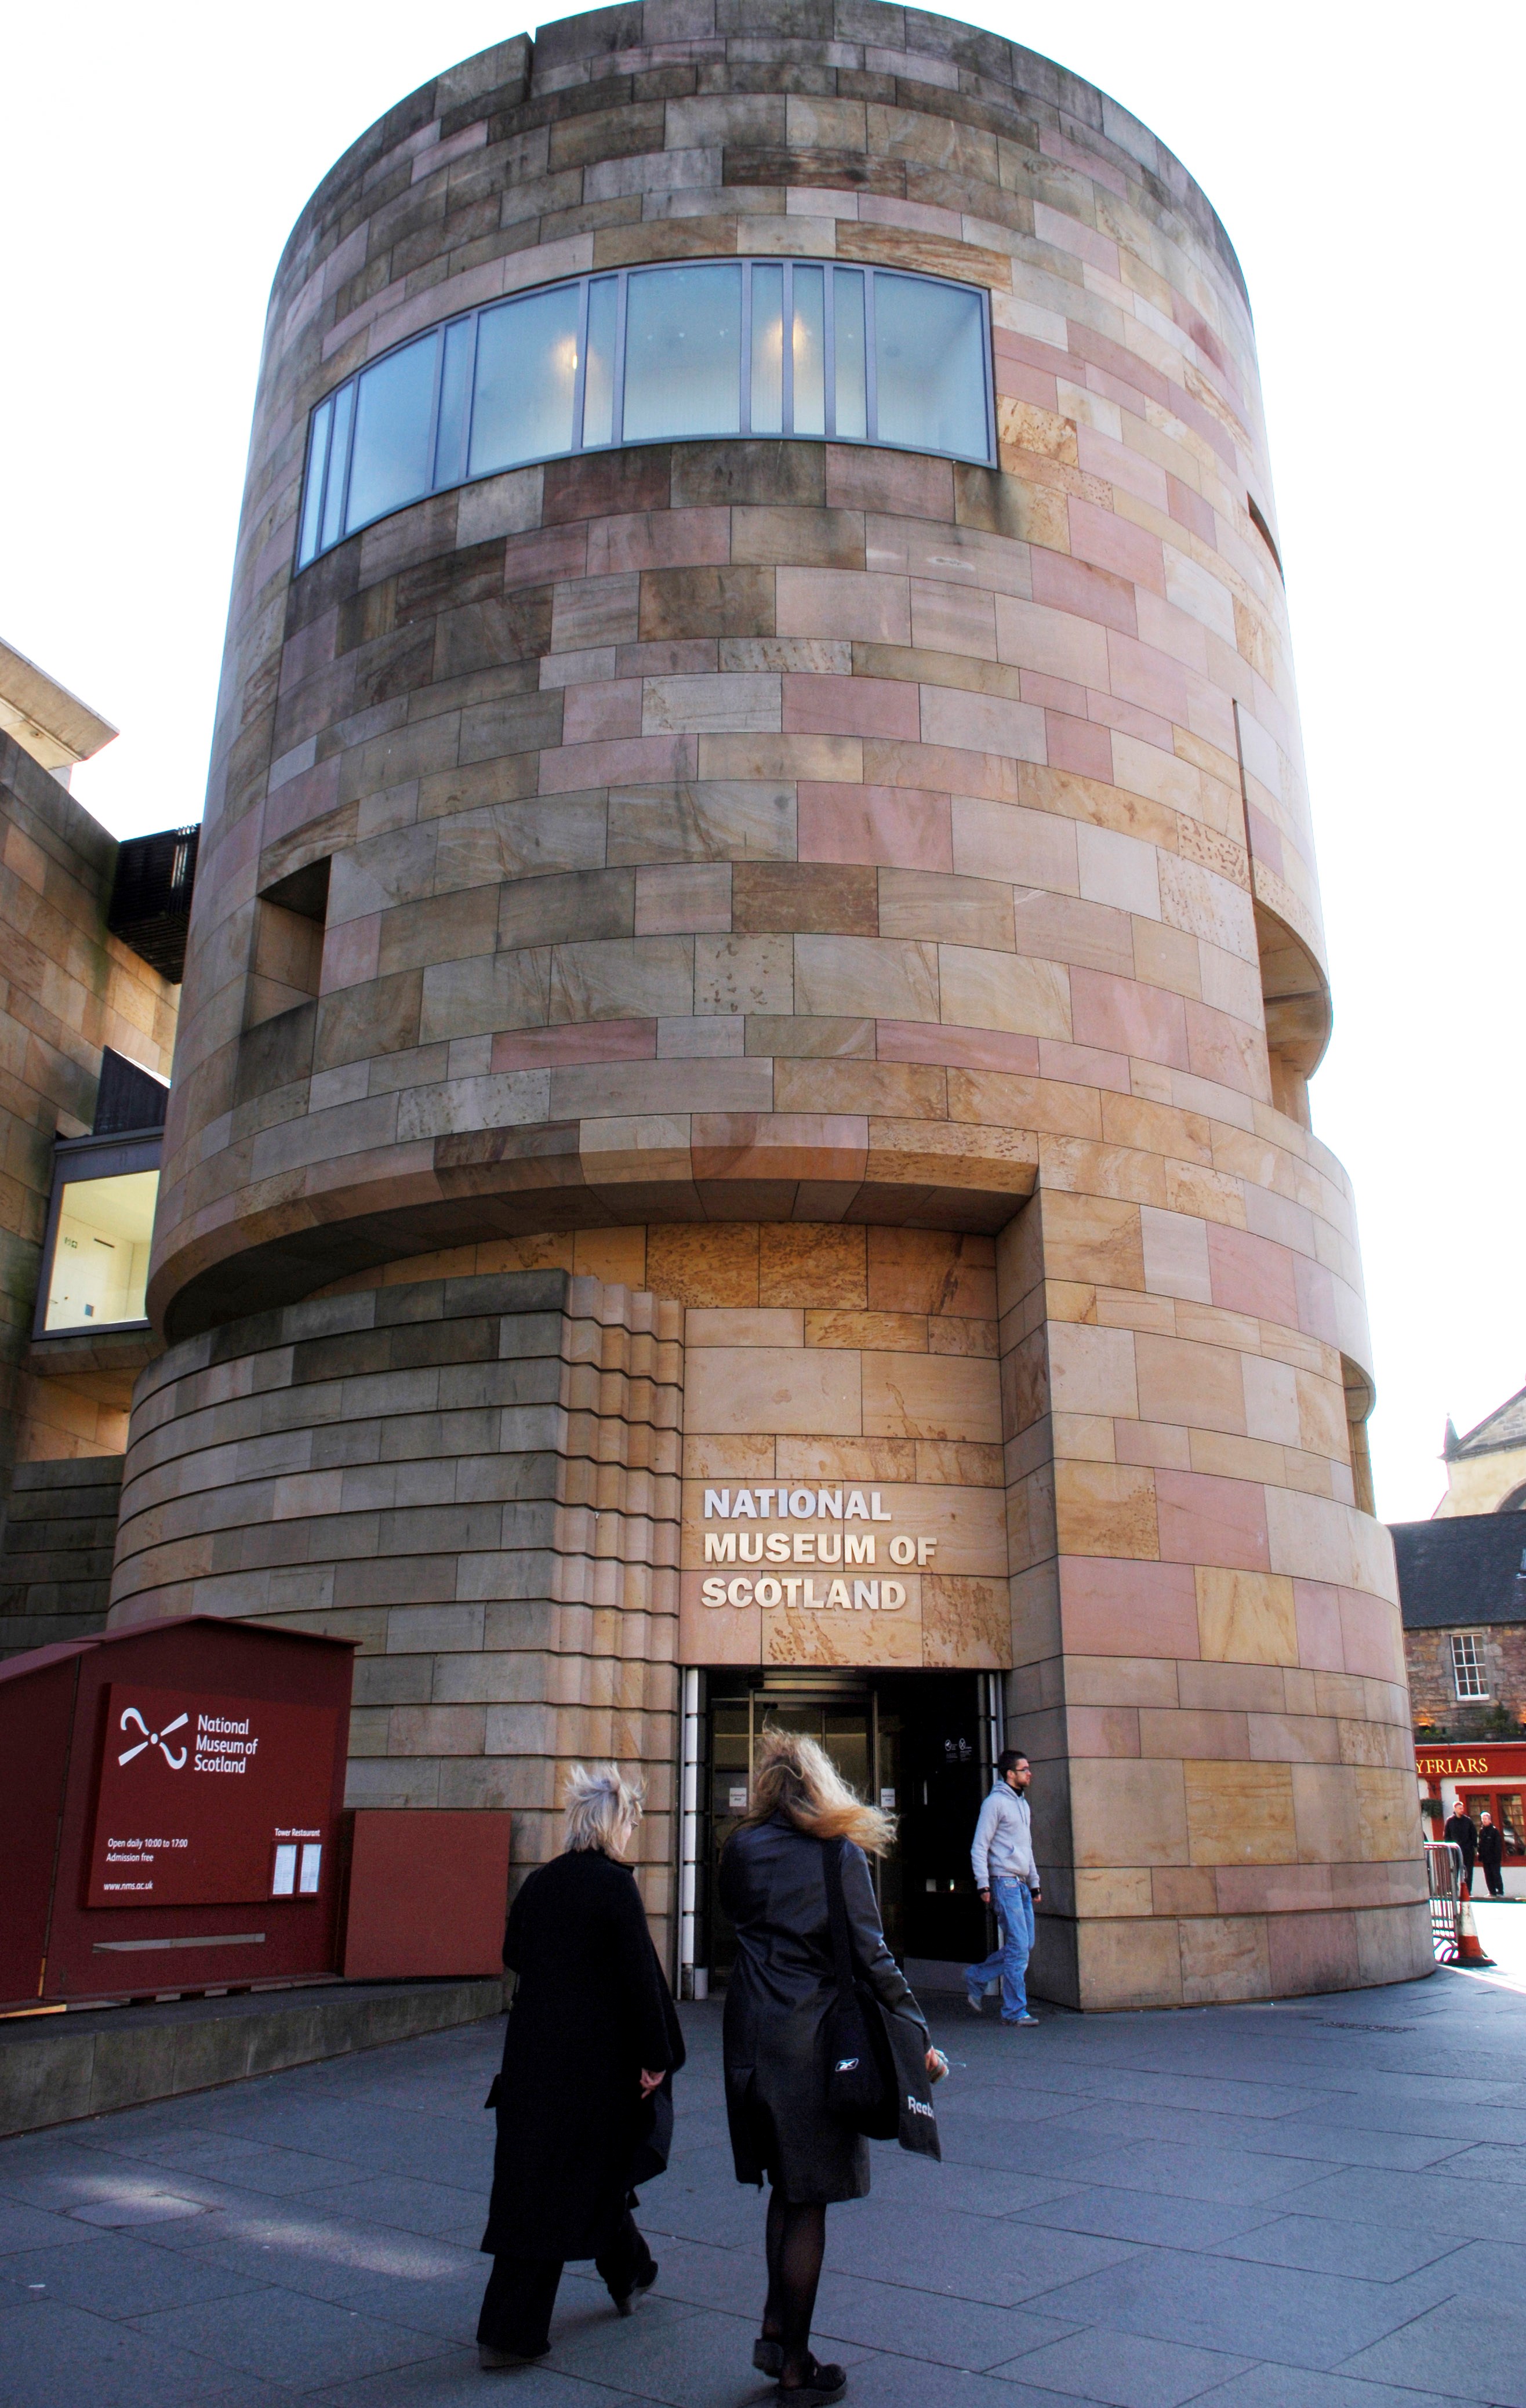 The Tower Entrance of the National Museum of Scotland.